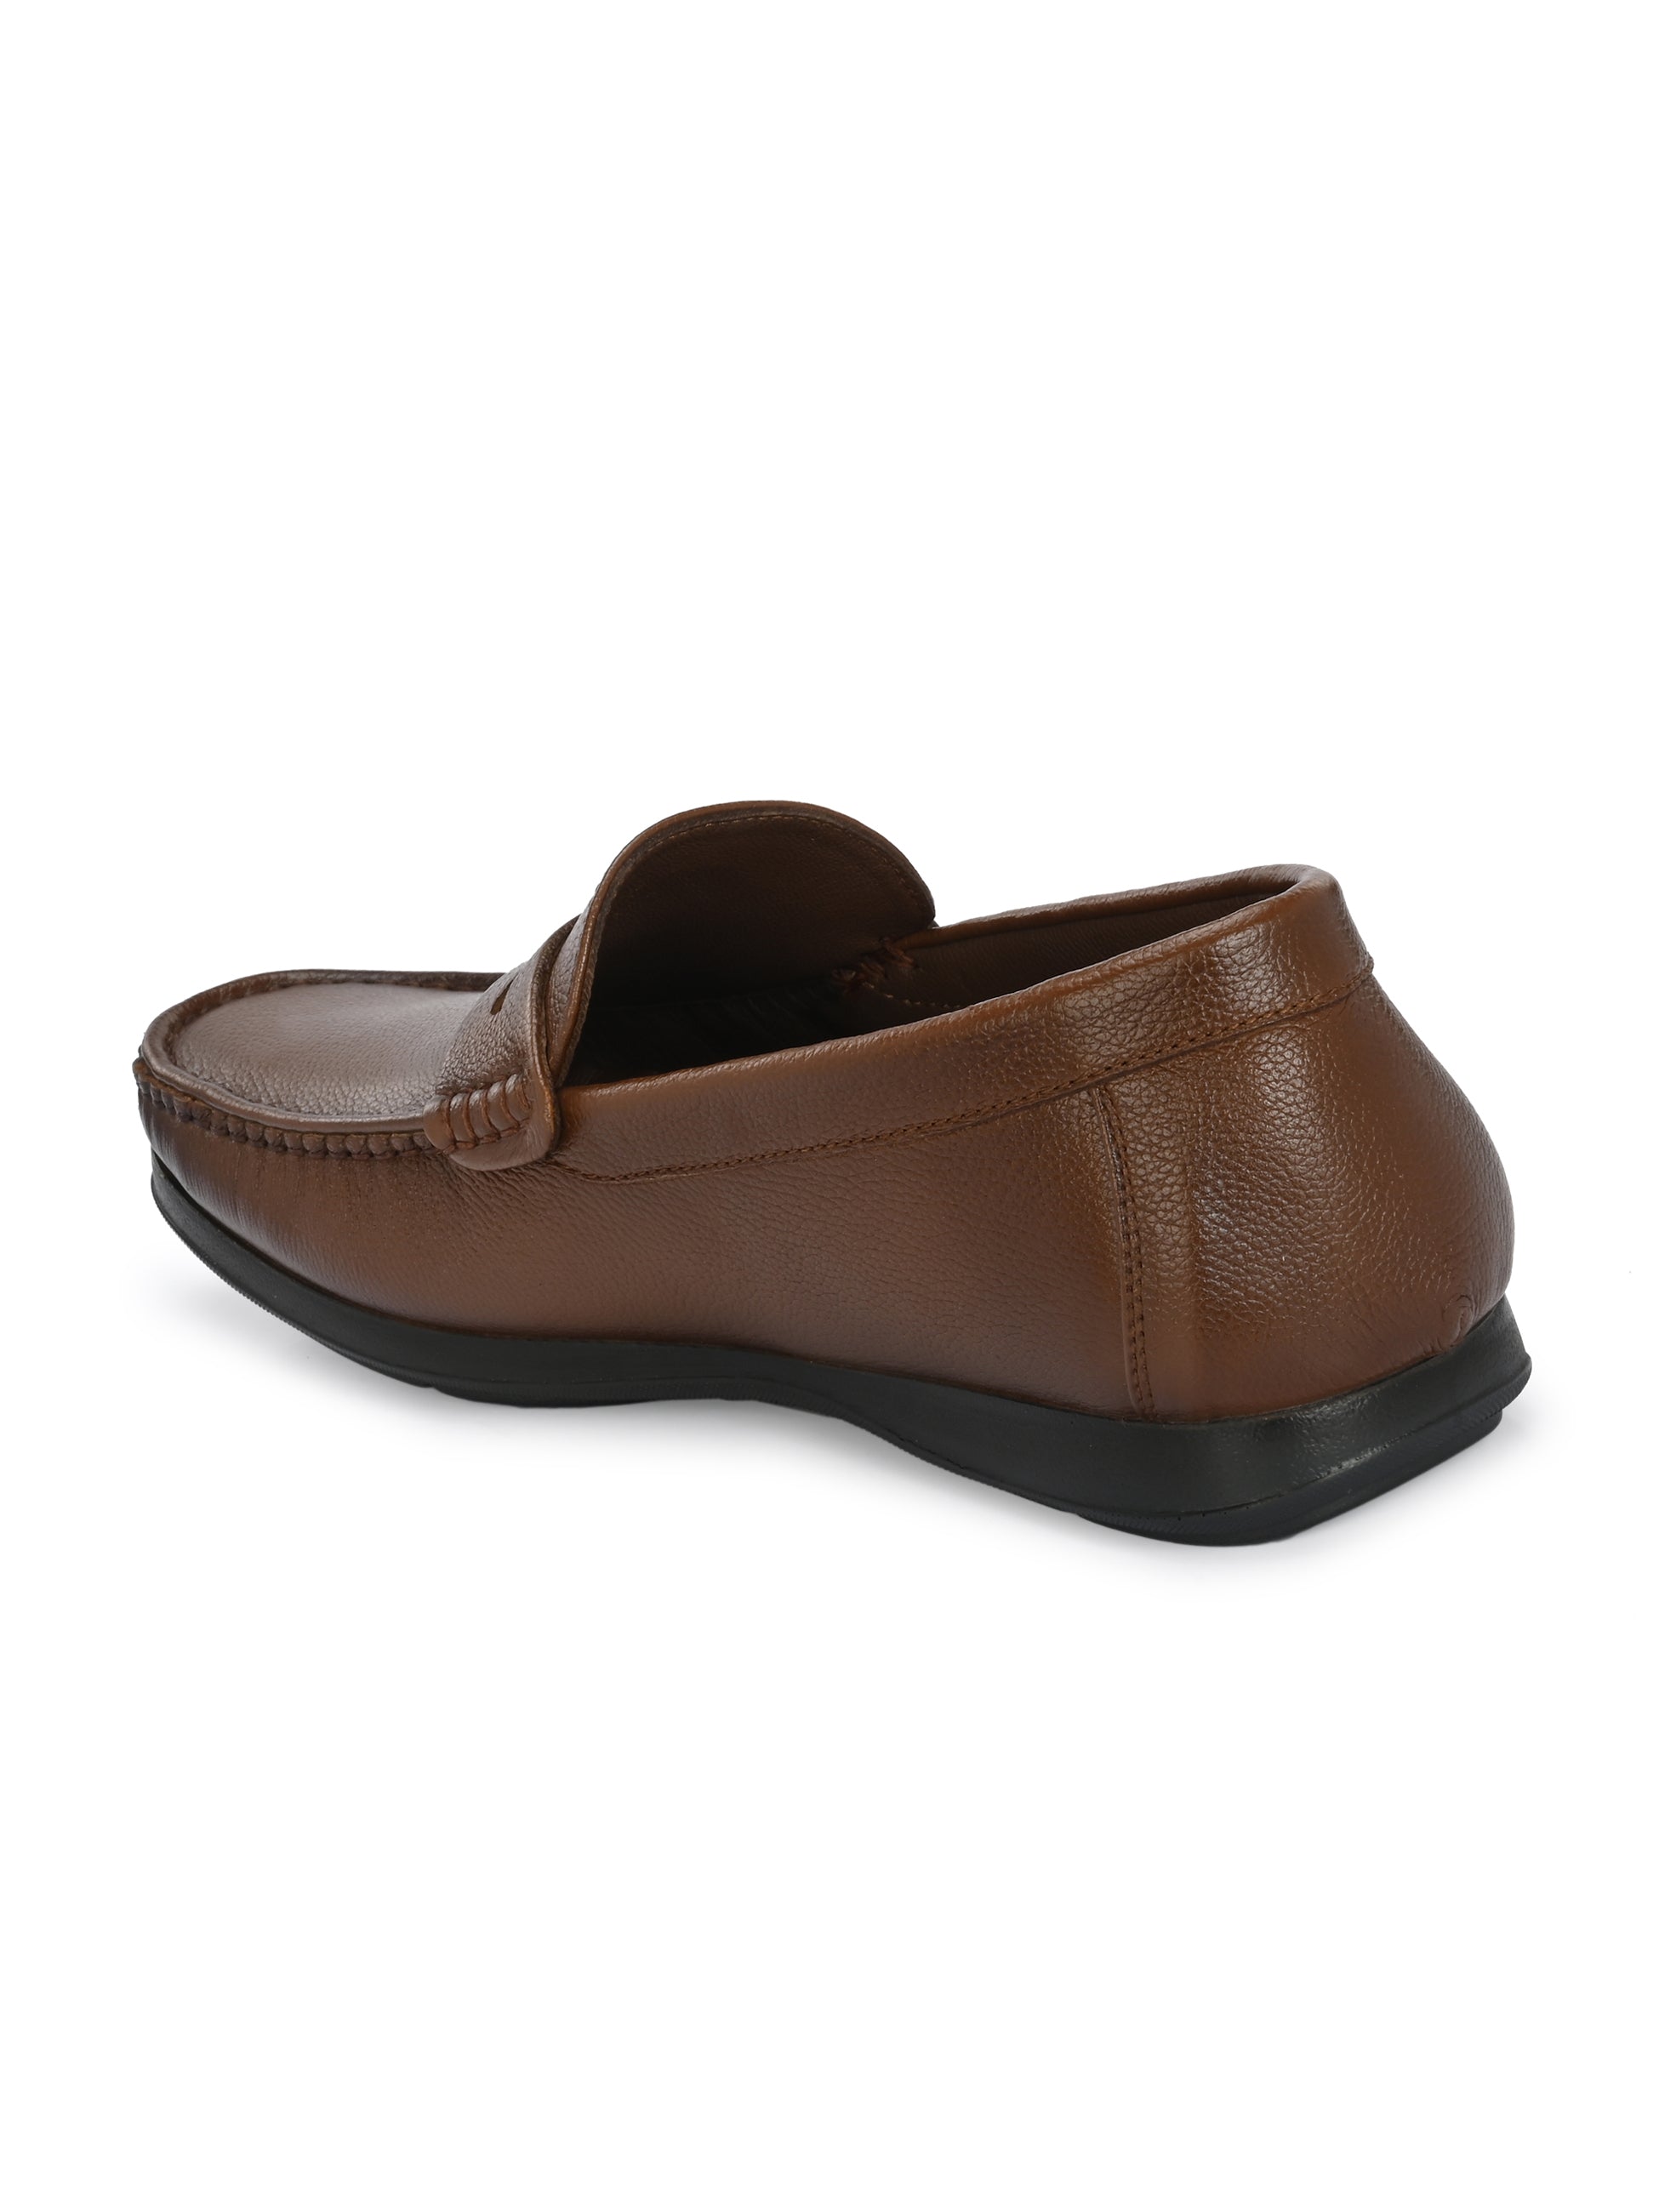 Egoss Casual Penny Loafers For Men